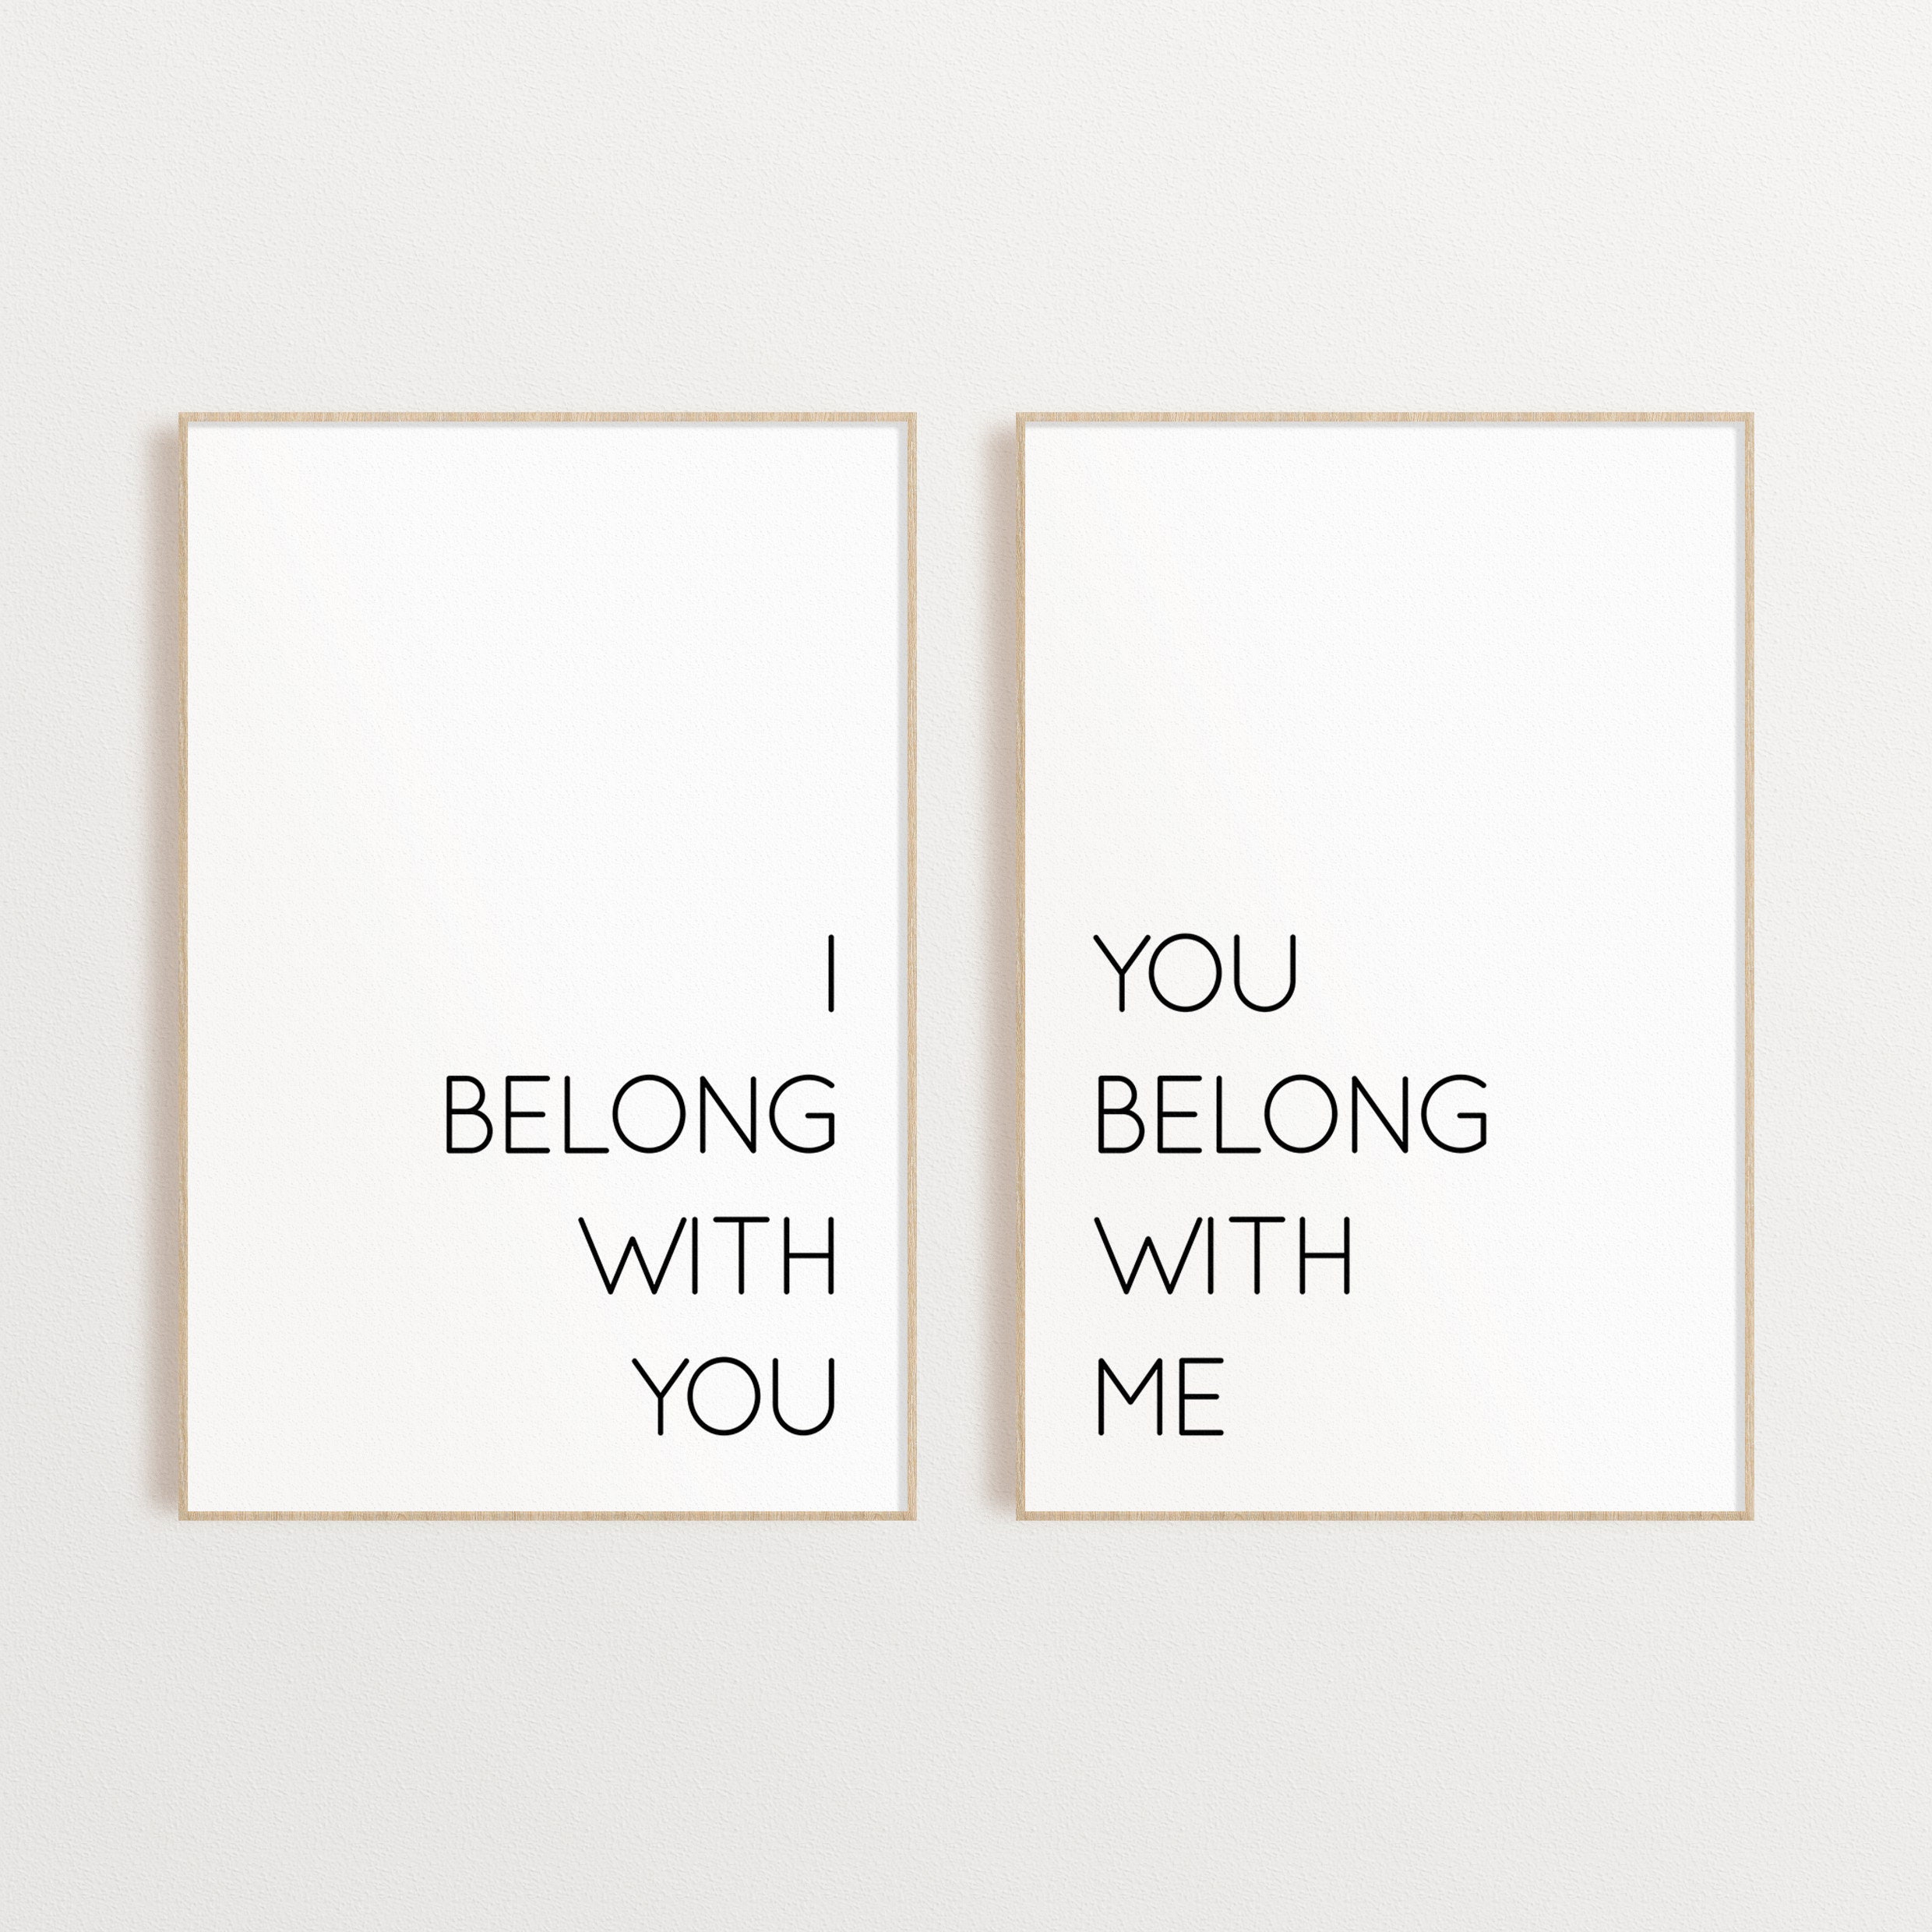 Taylor Swift - You Belong With Me print by Chungkong